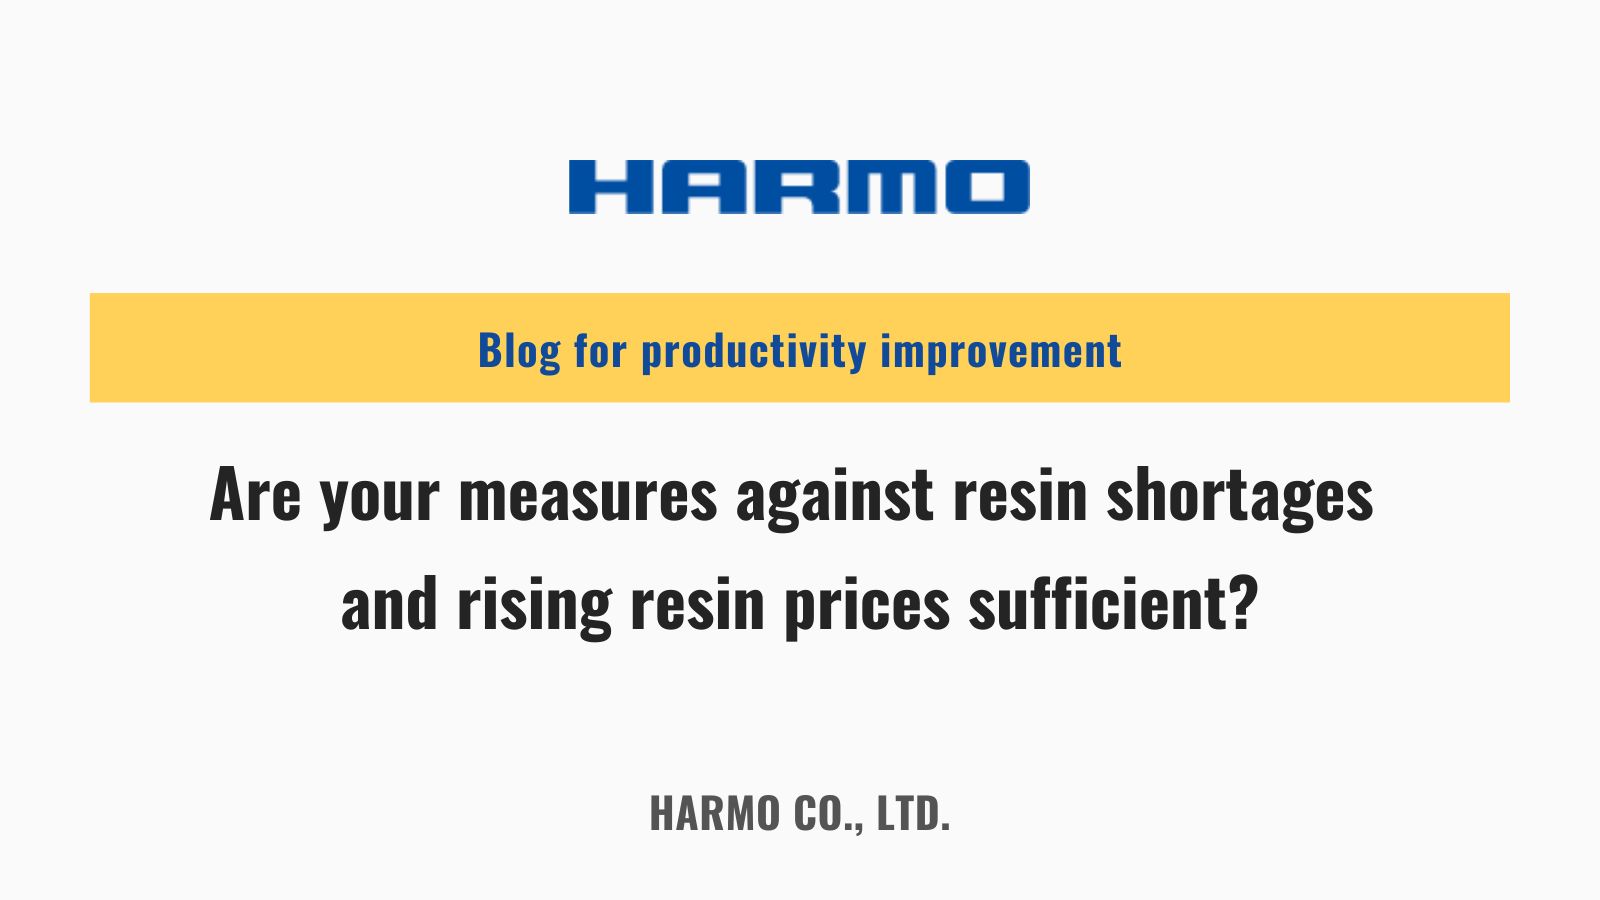 Are your measures against resin shortages and rising resin prices sufficient?